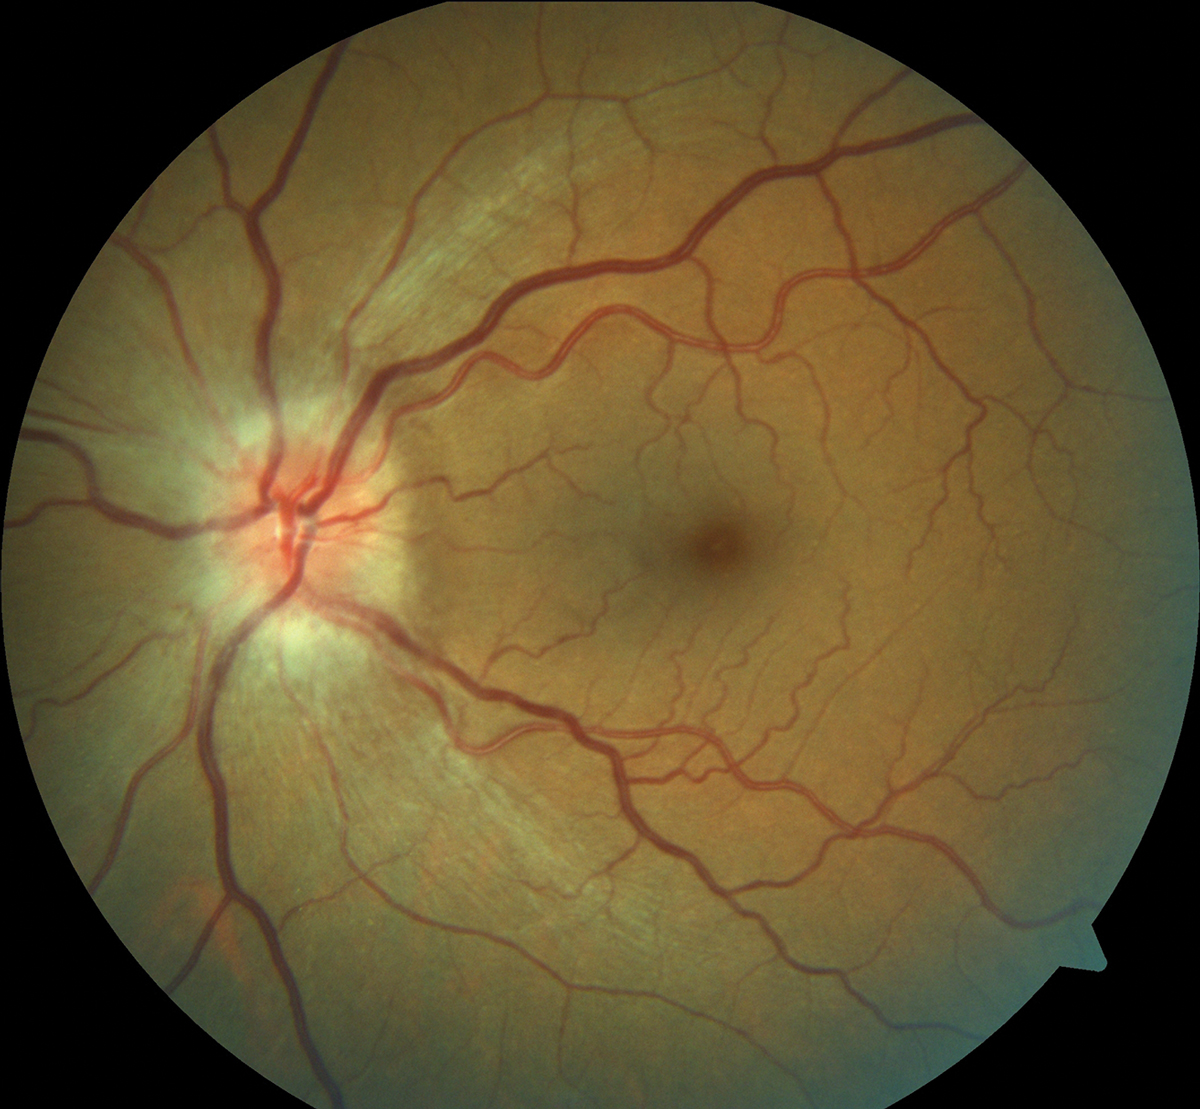 This NAION patient presented with significant optic nerve edema.